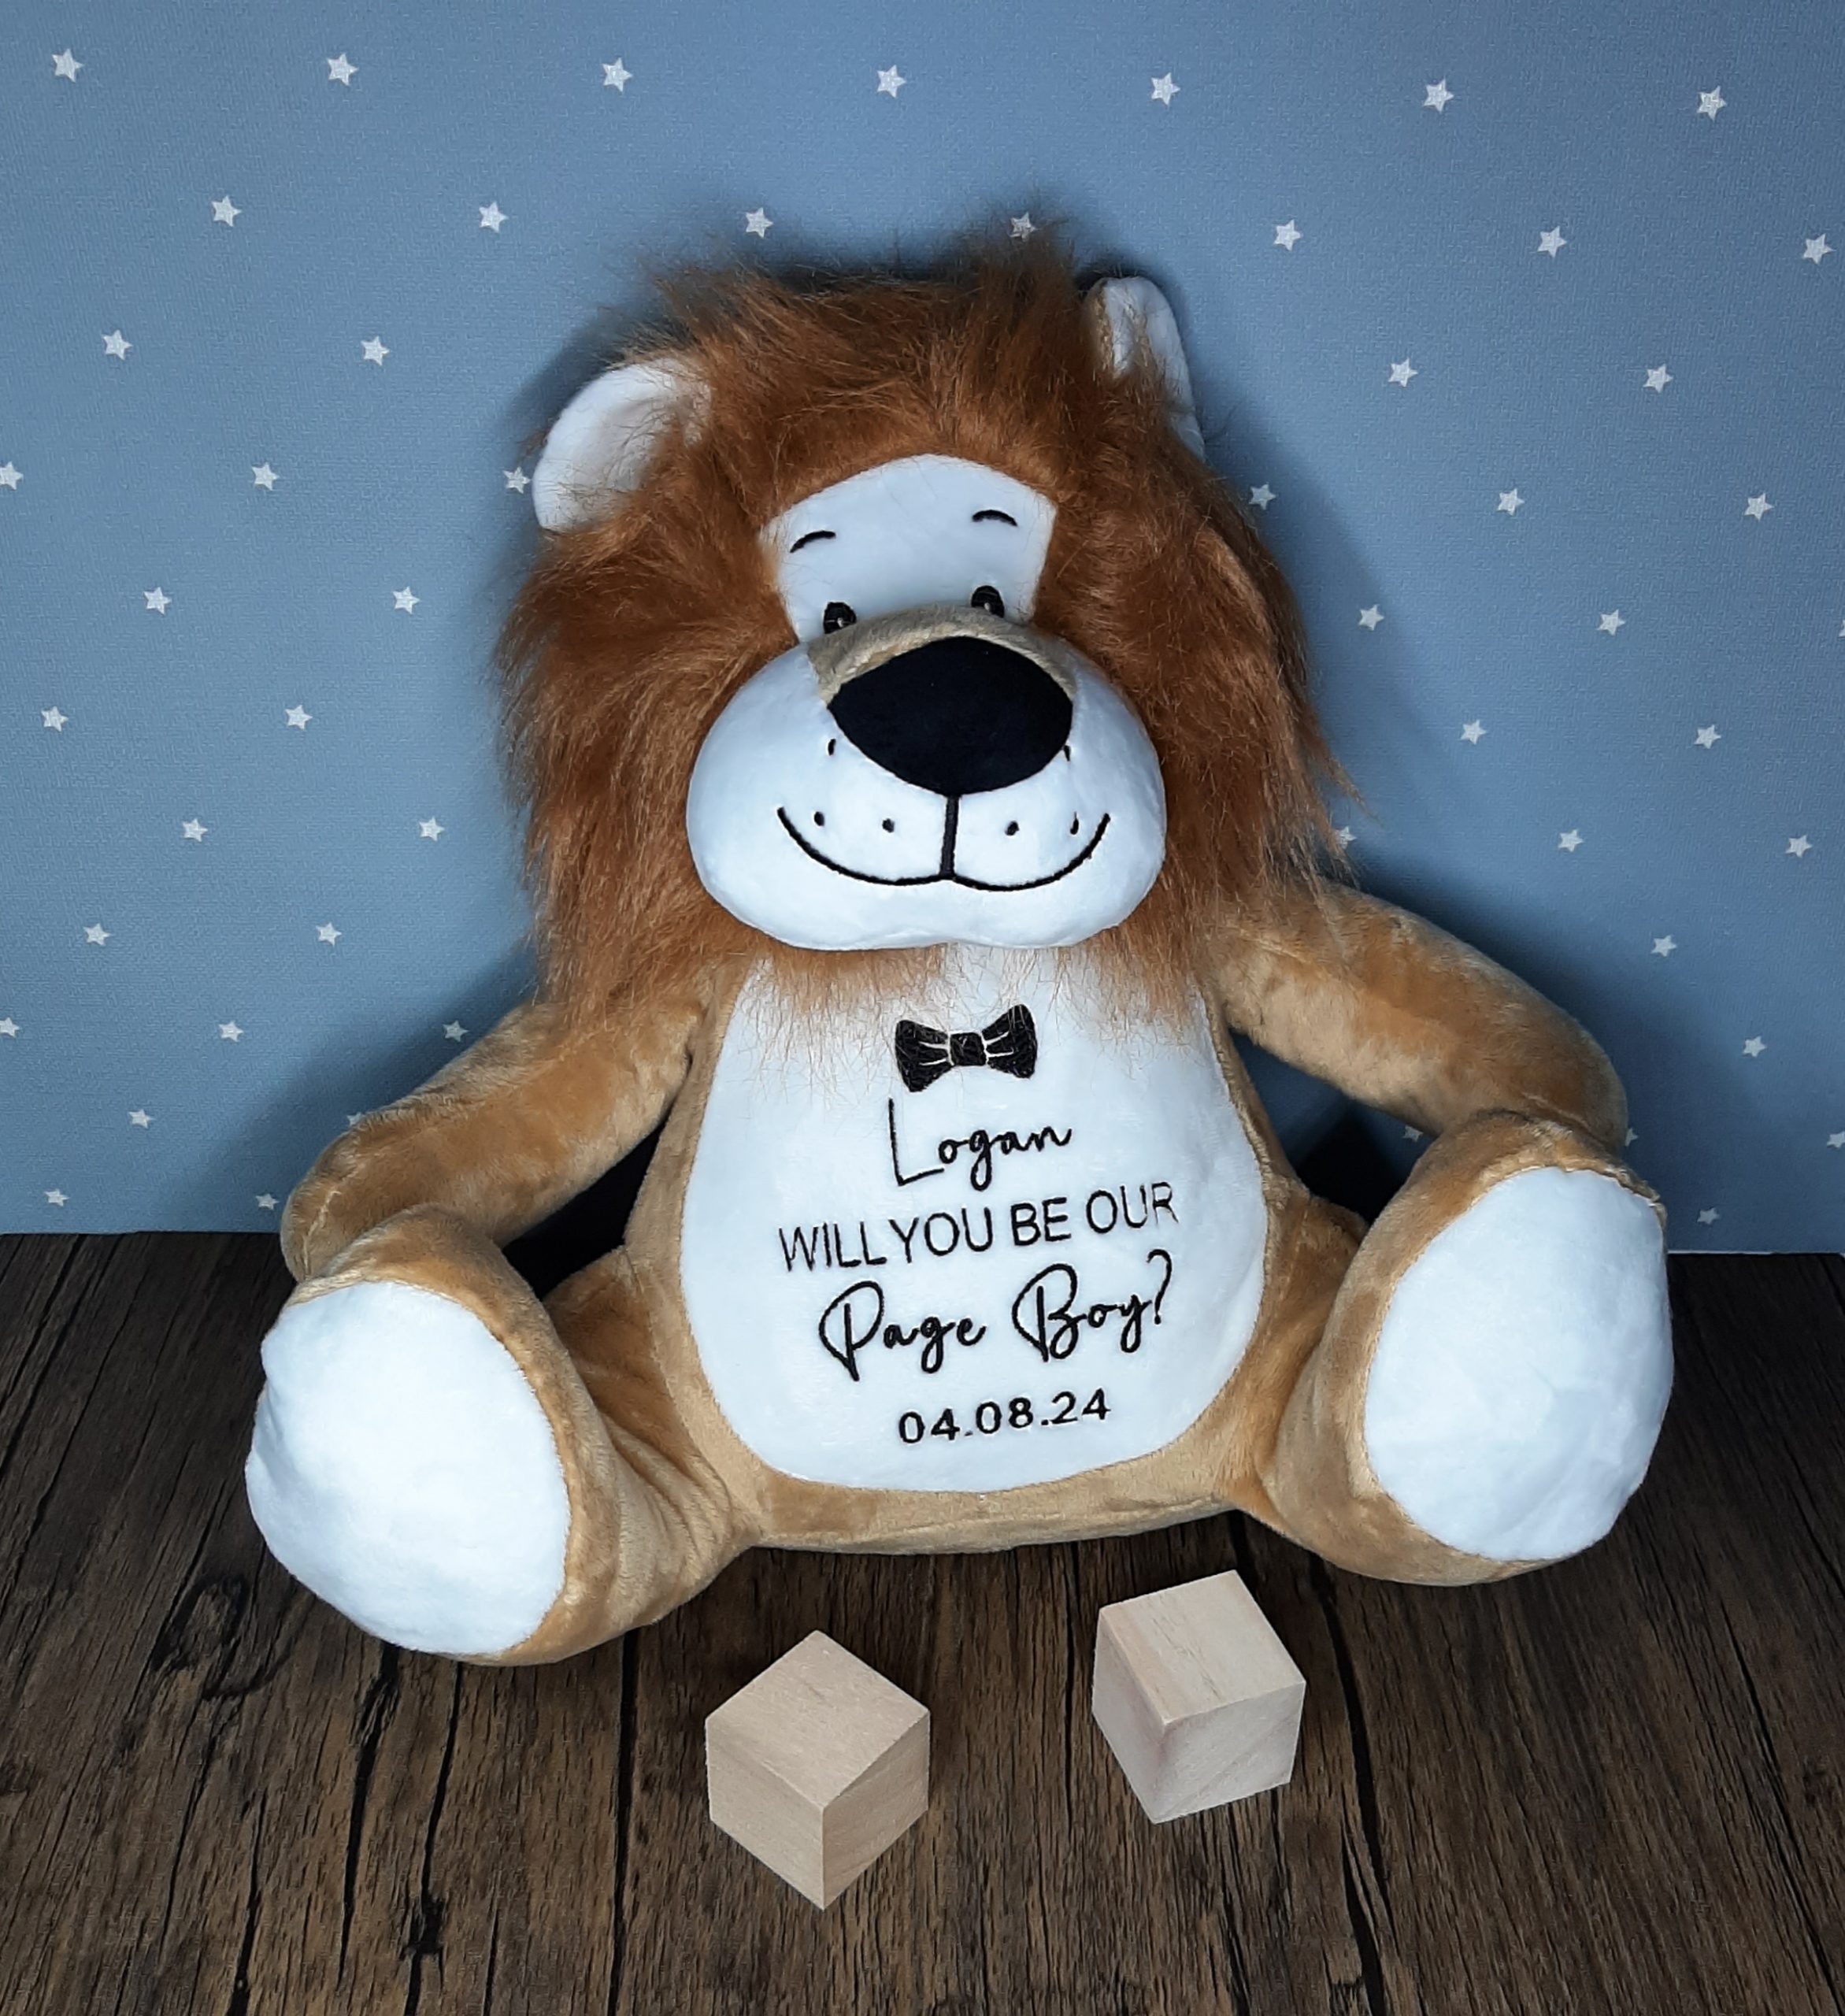 Embroidered Soft Cuddly Lion with page boy design embroidered